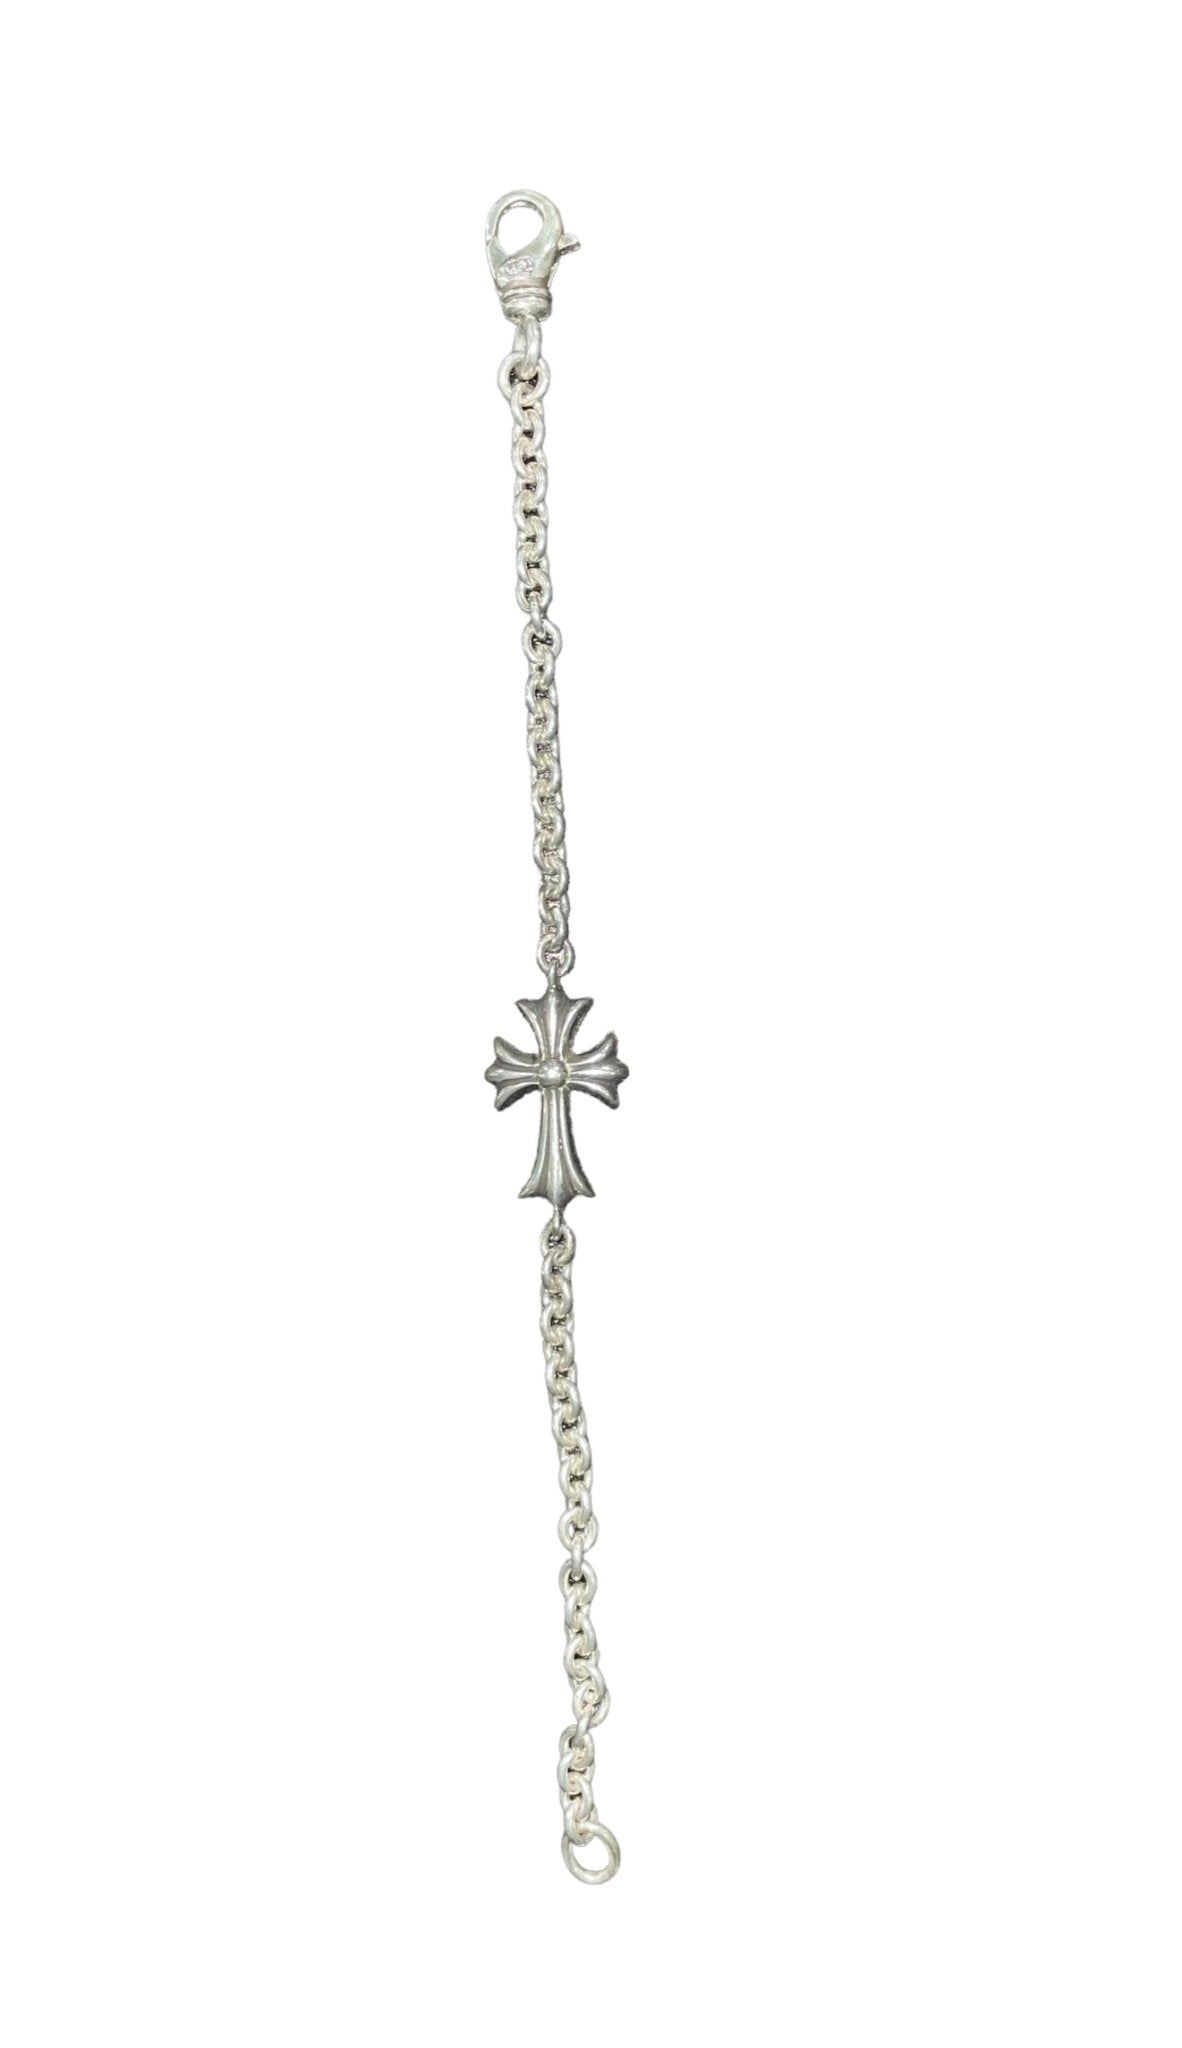 Chrome Hearts Cross Silver Tiny Bracelet (7.5 inches) - Supra Sneakers